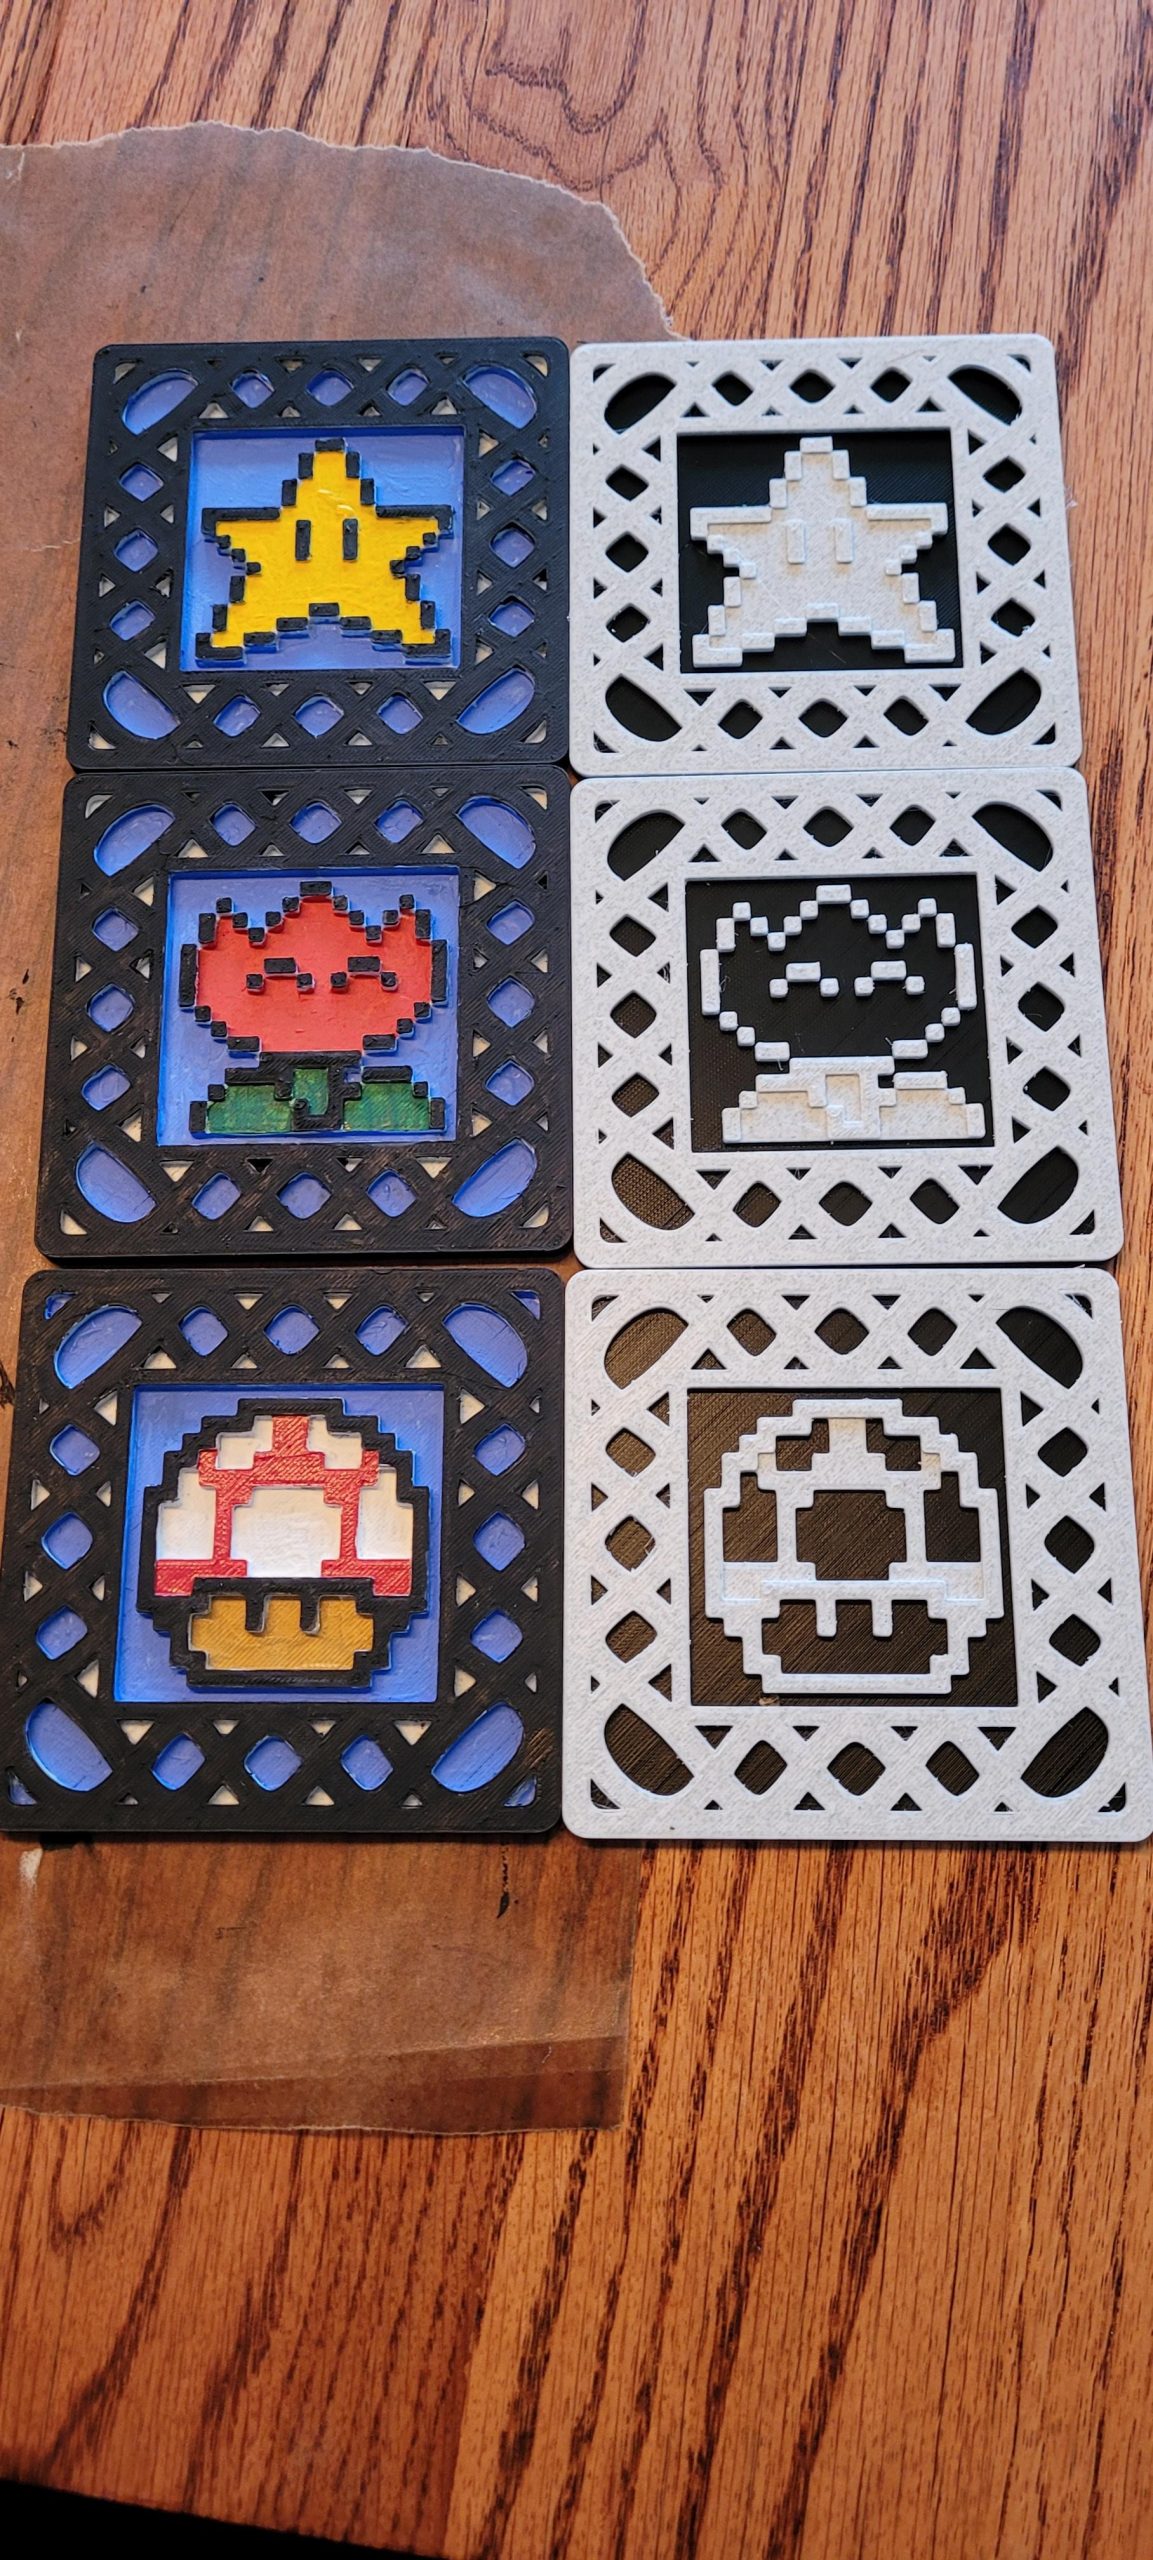 Tried my hand at negate some 3D printed coasters